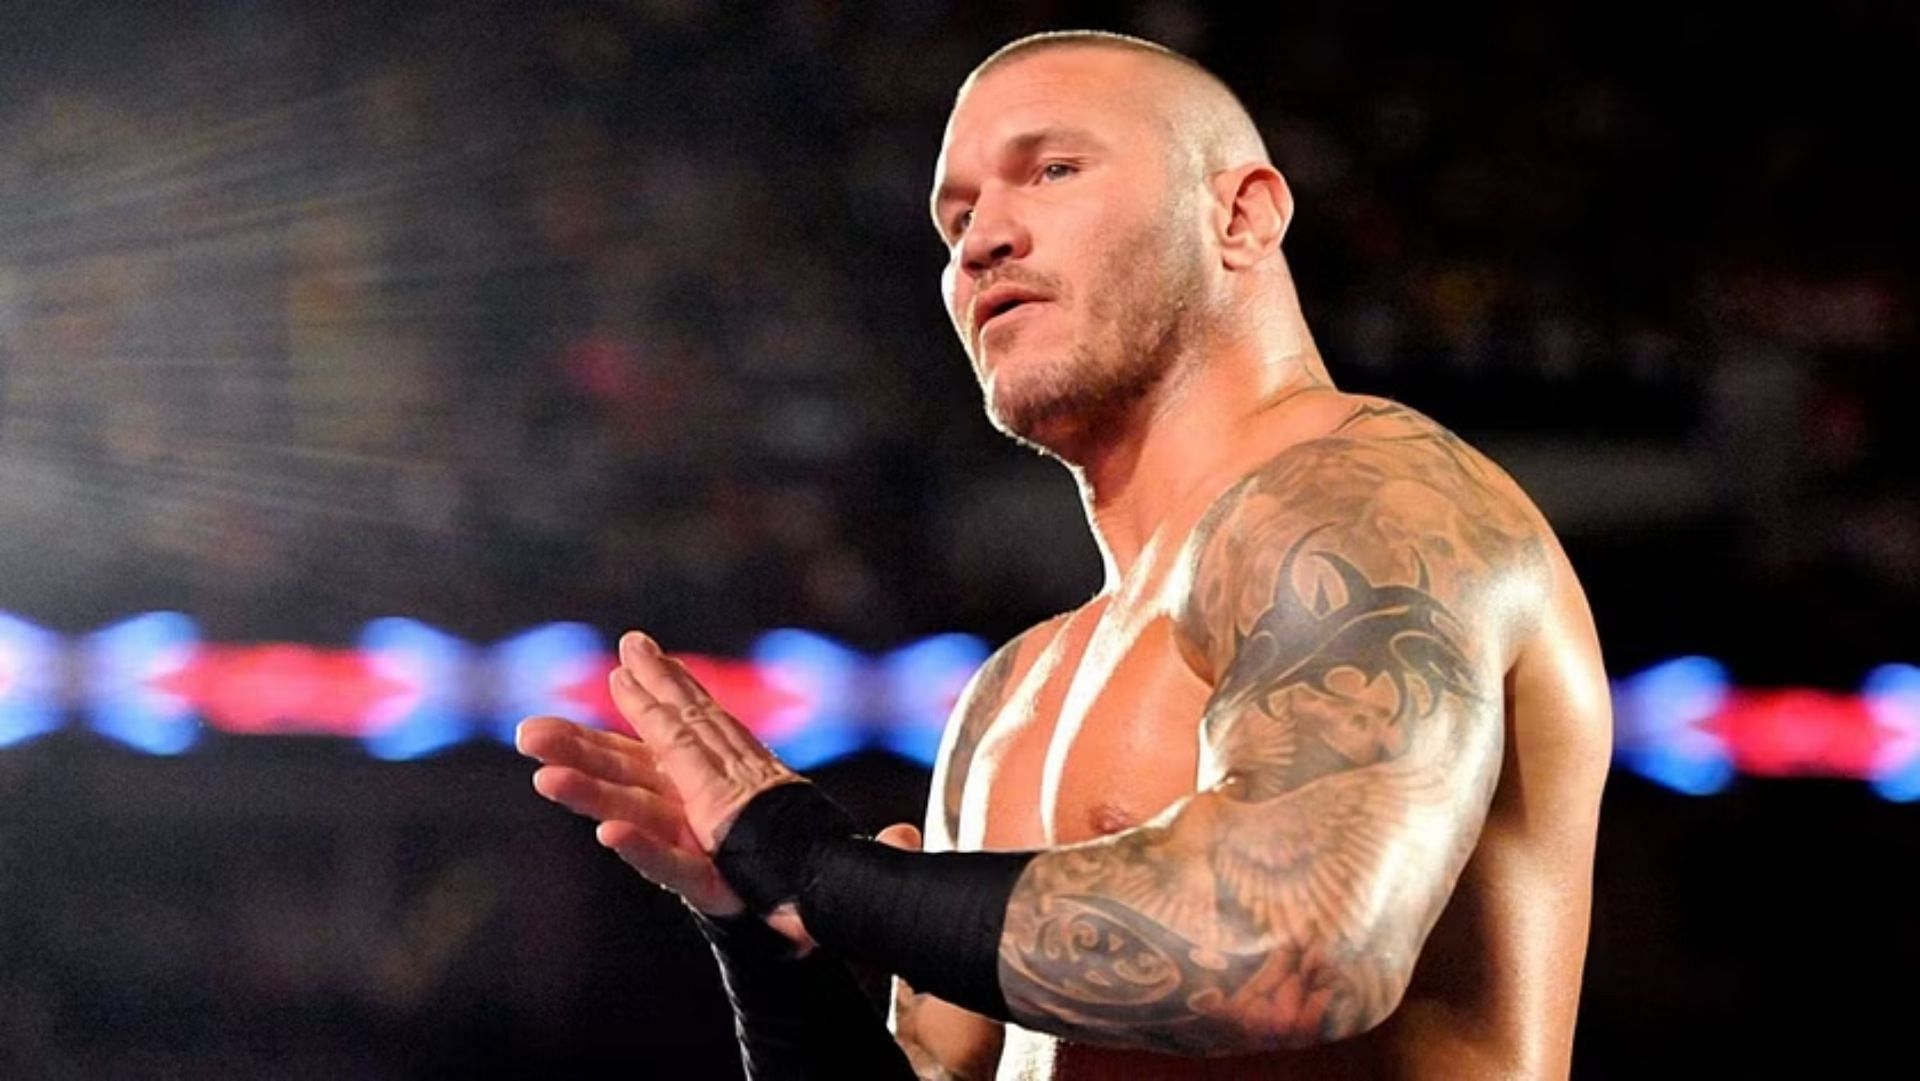 Who would you like to see Randy Orton face when he returns?